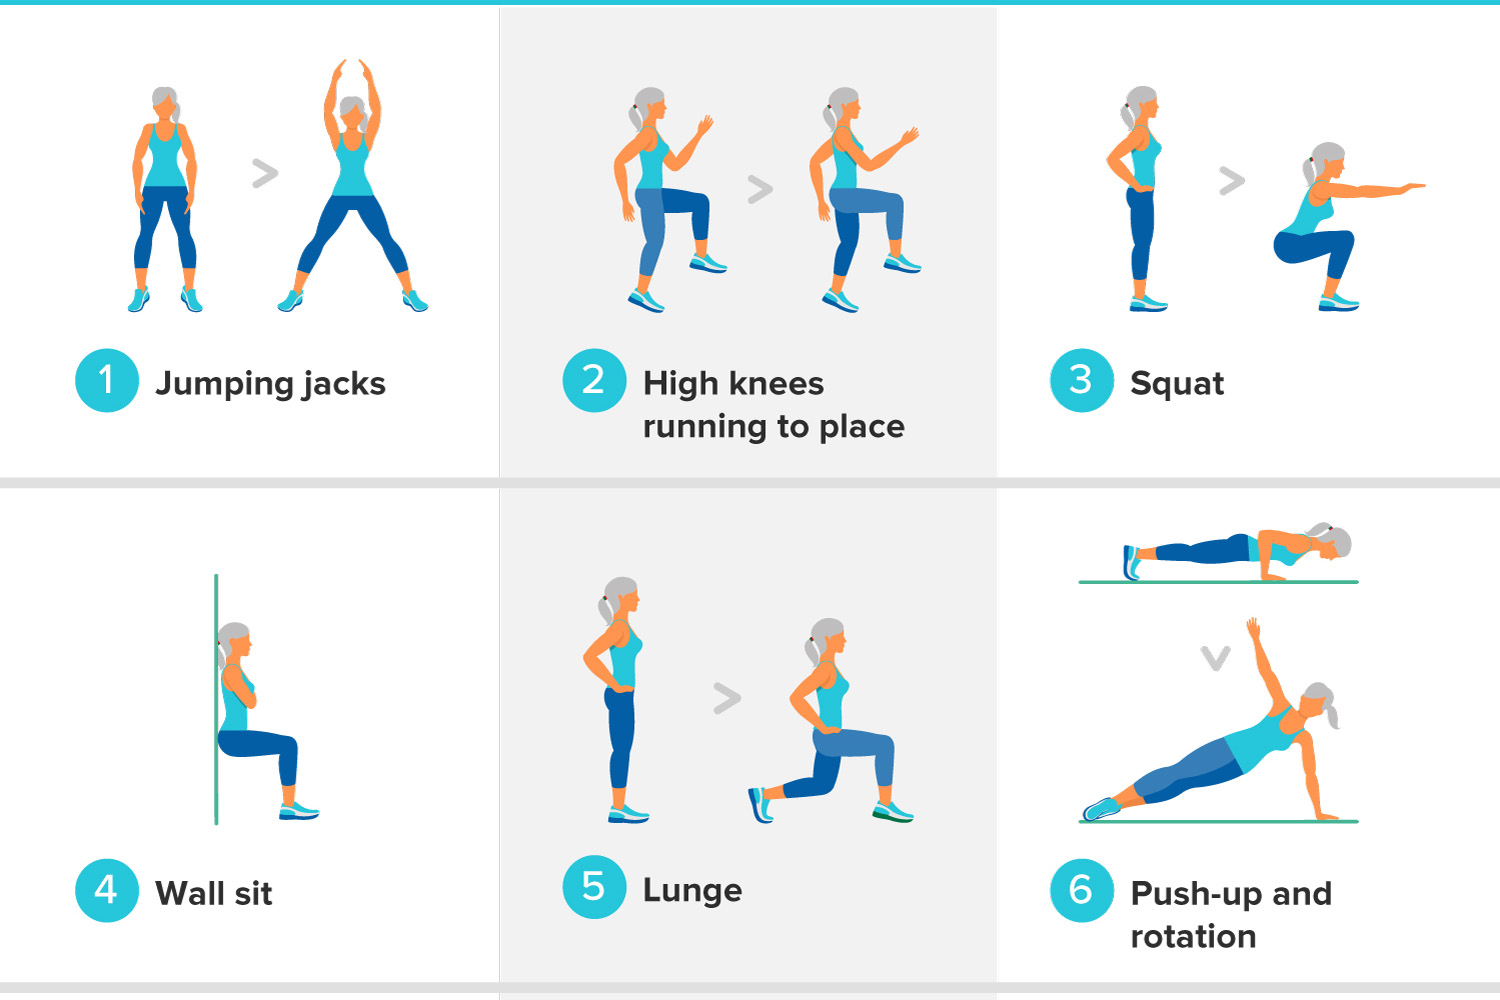 Get Fit Over 50: Easy 15 Minute HIIT Workout To Do at Home ...